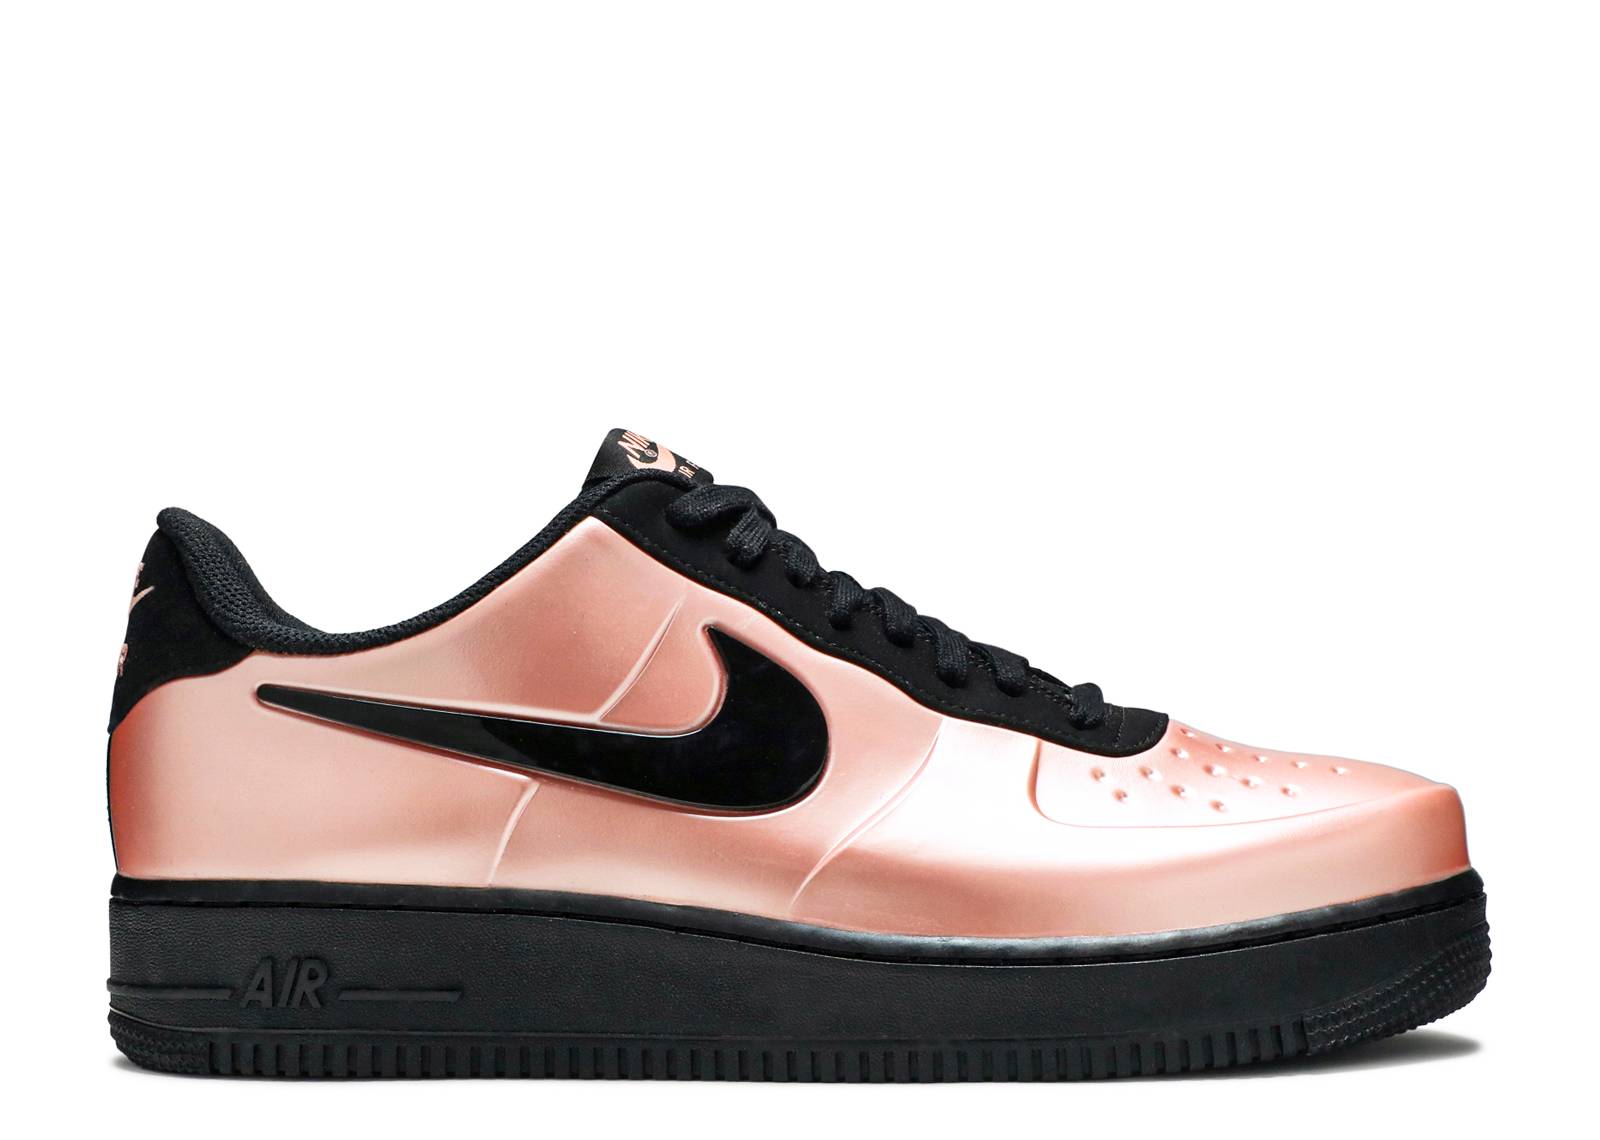 Air Force 1 Foamposite Pro Cup 'Coral Stardust'